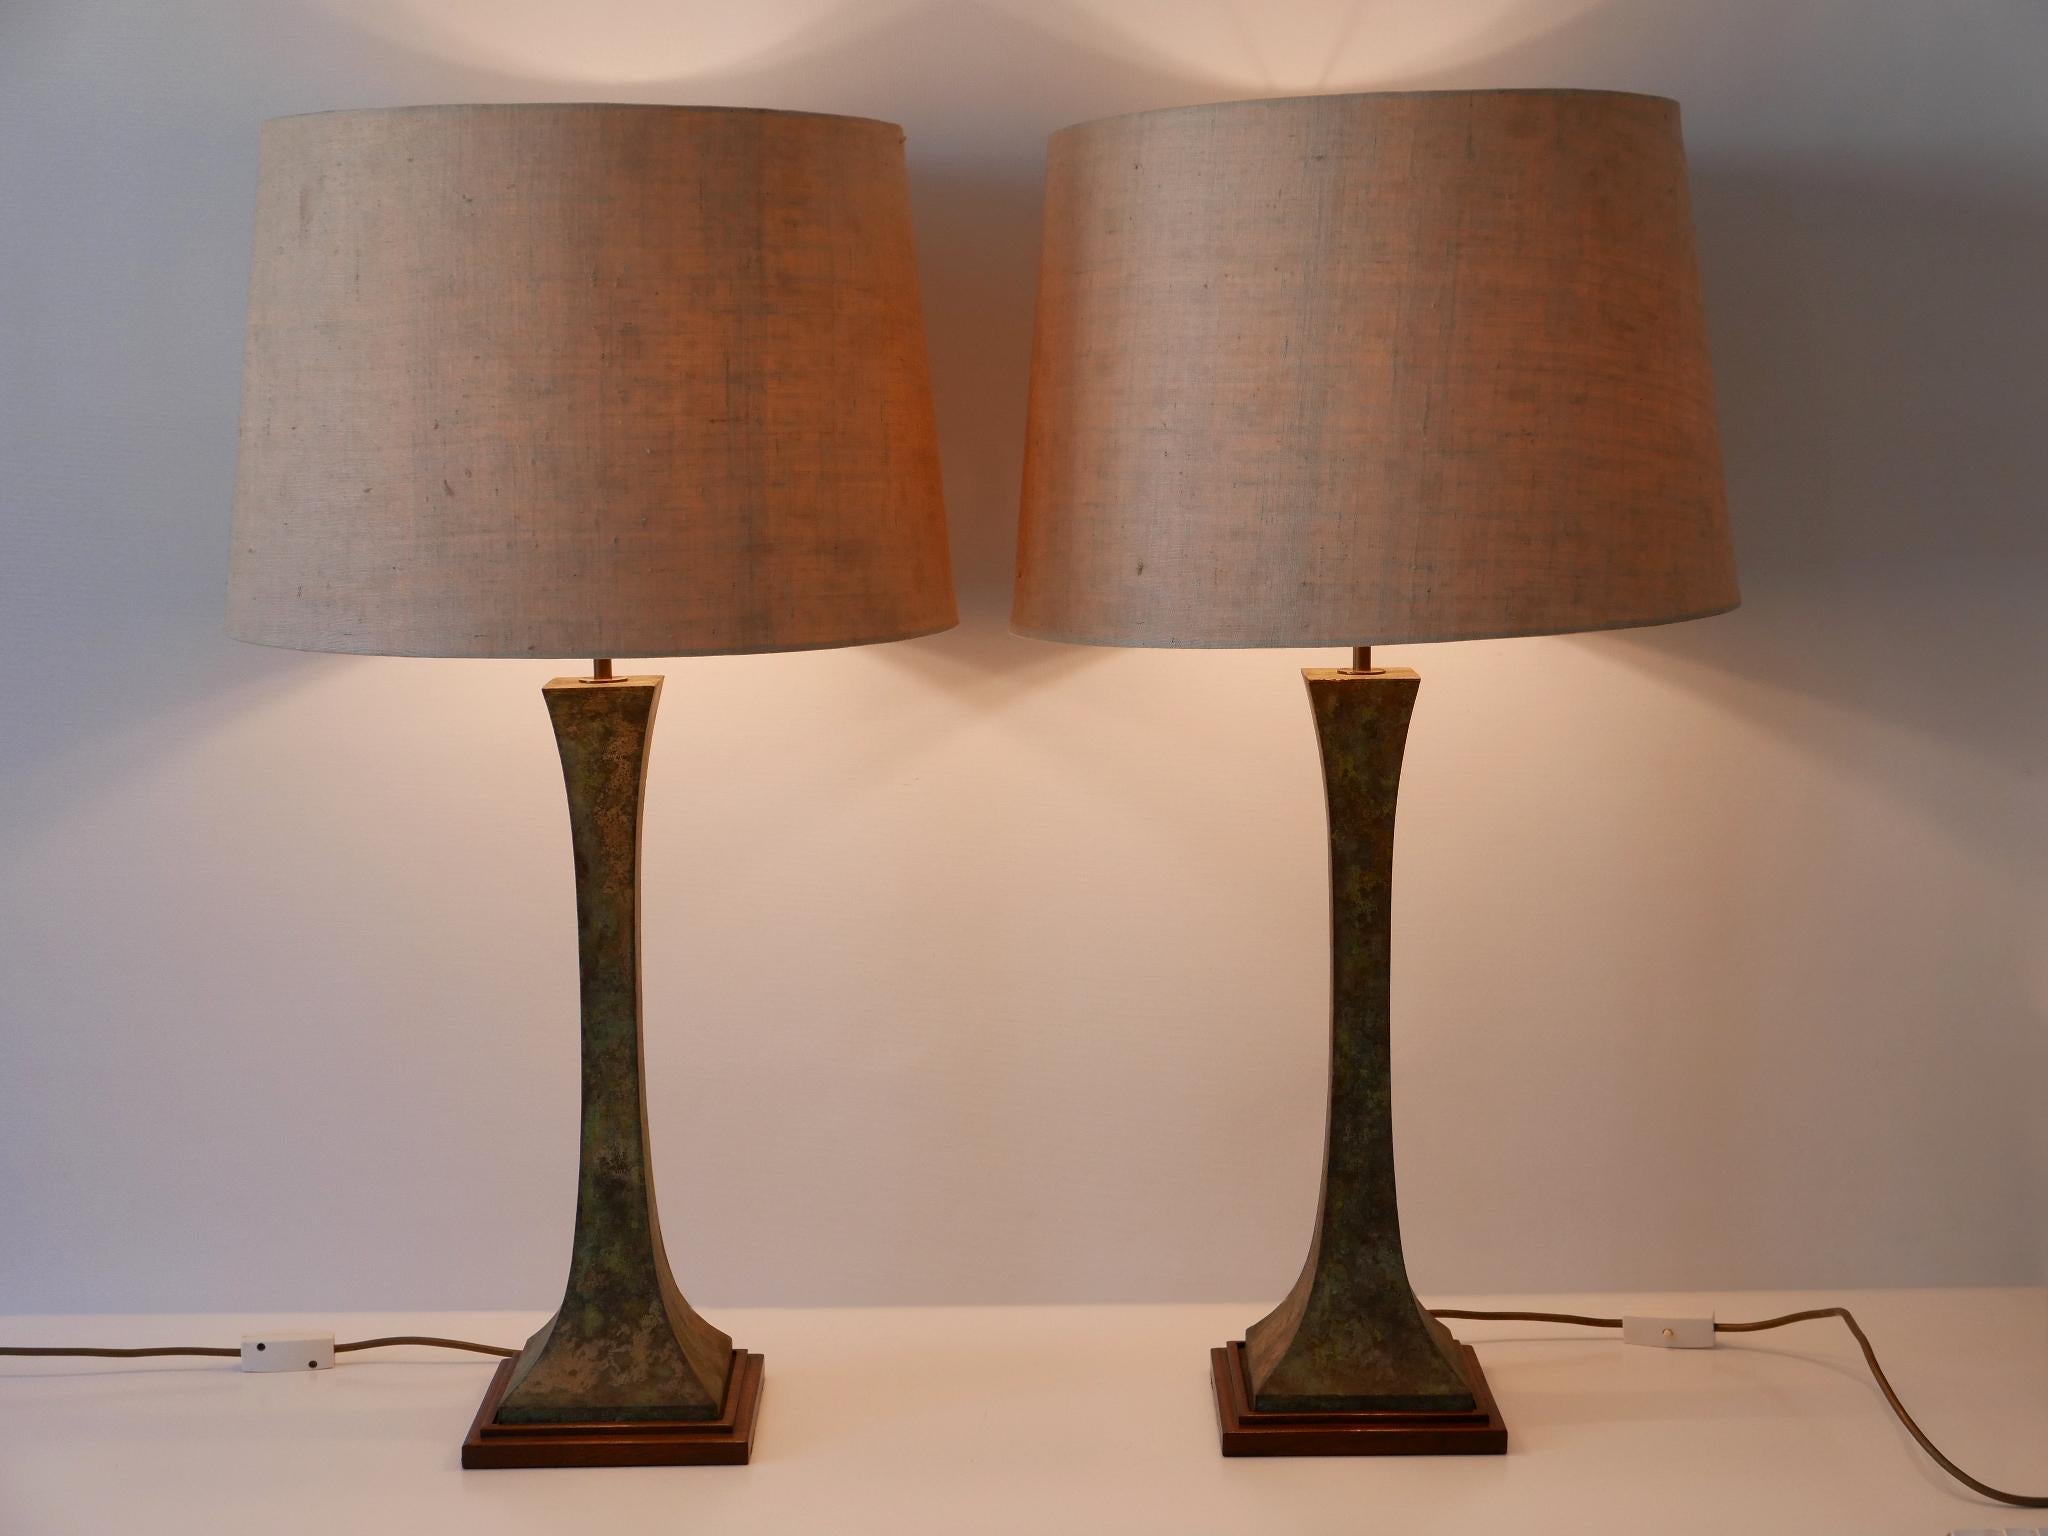 Set of two exceptional, elegant and large Mid-Century Modern bronze verdigris table lamps. Designed by Stewart Ross James and manufactured by Hansen Lighting, New York, USA, 1960s.

Executed in verdigris bronze, brass and wood; each lamp comes with